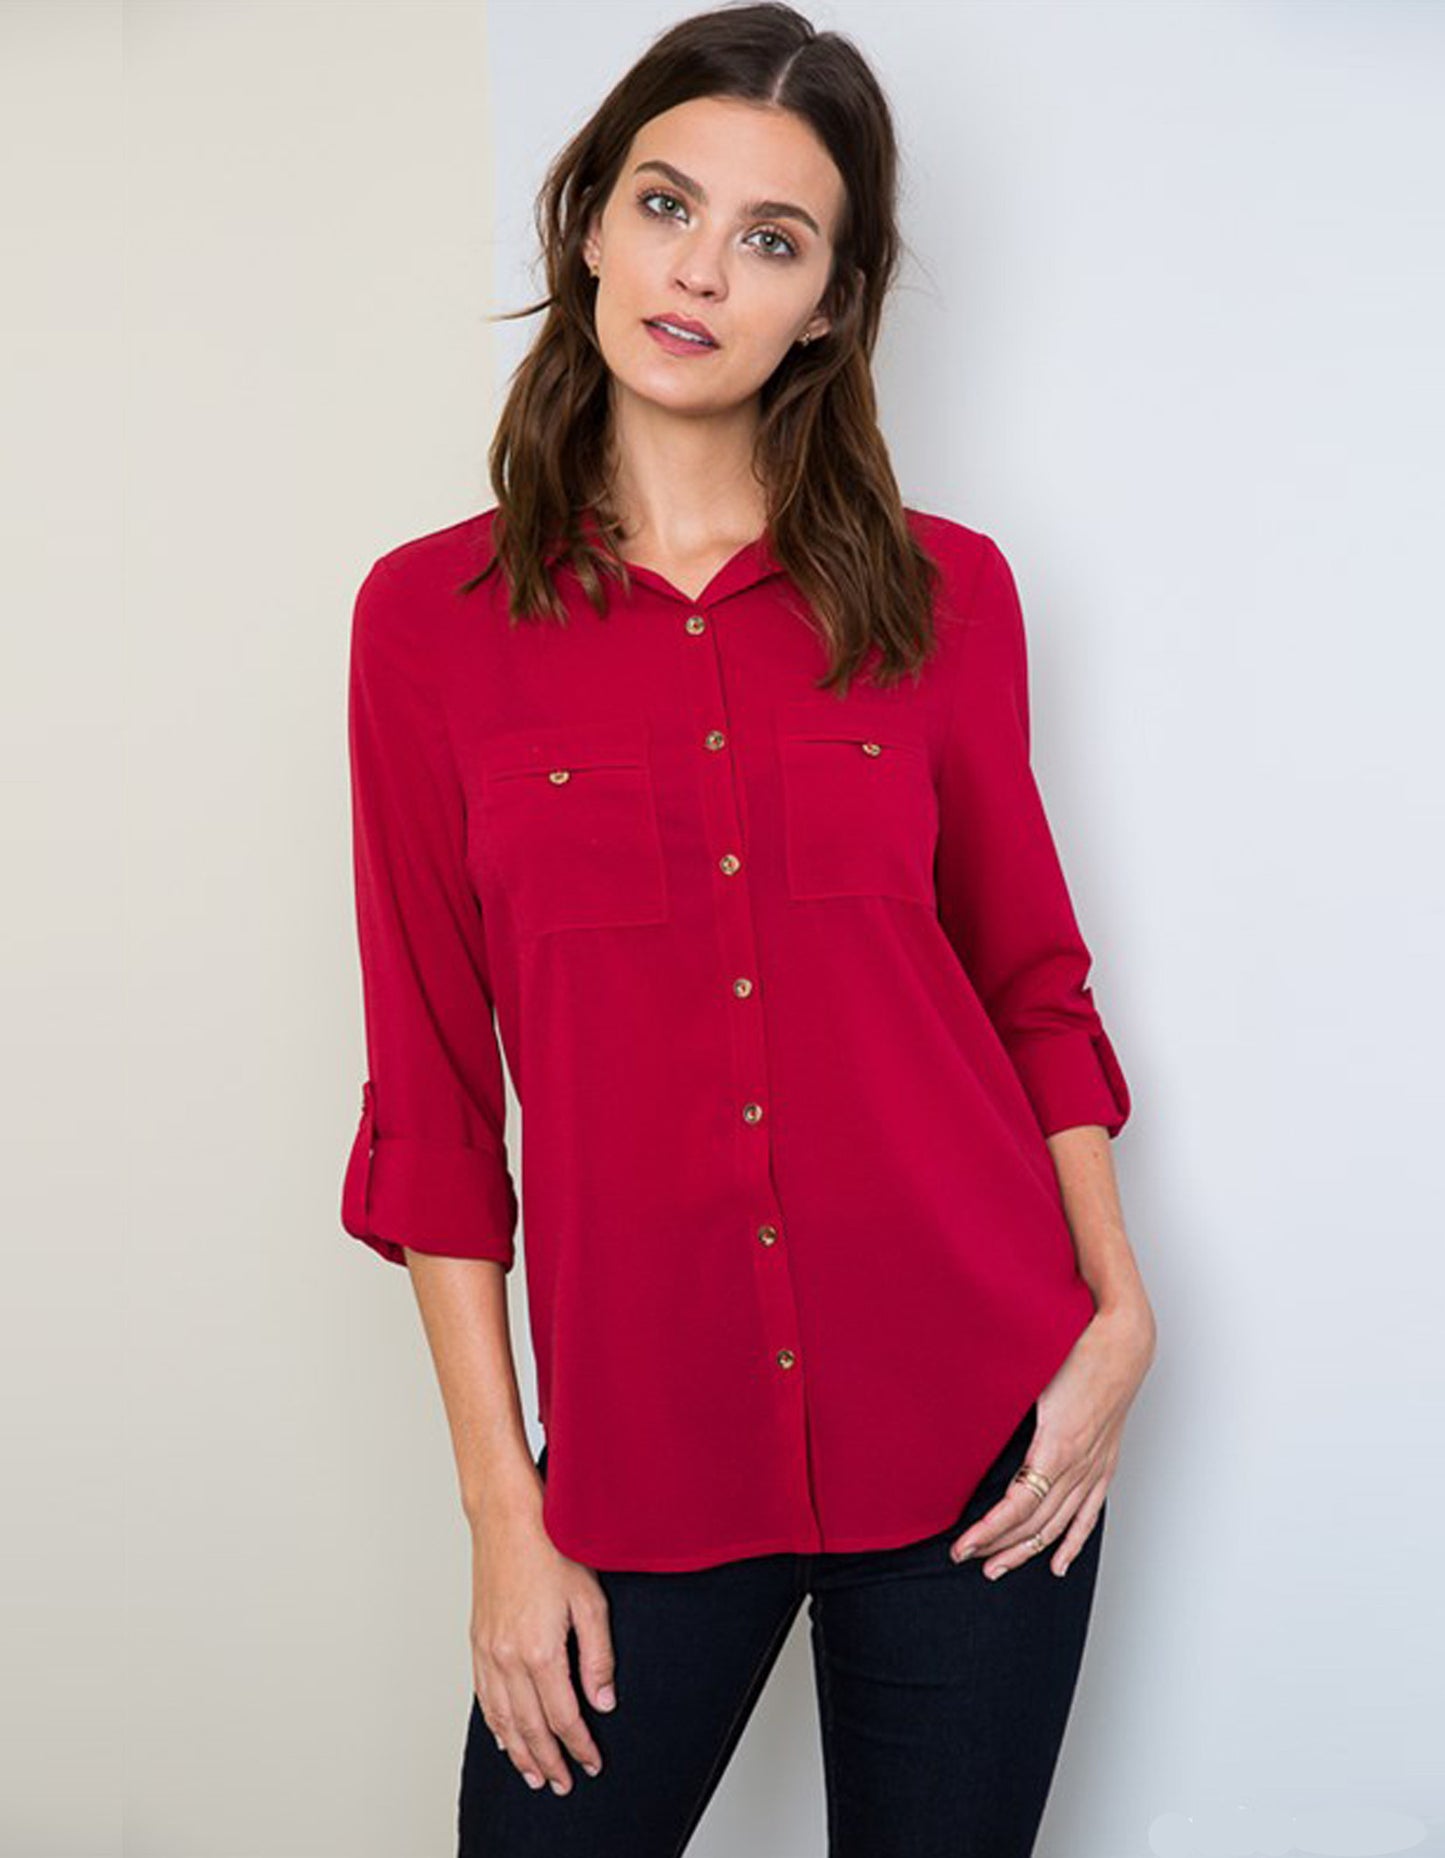 Red Elegant Blouse with Gold Button